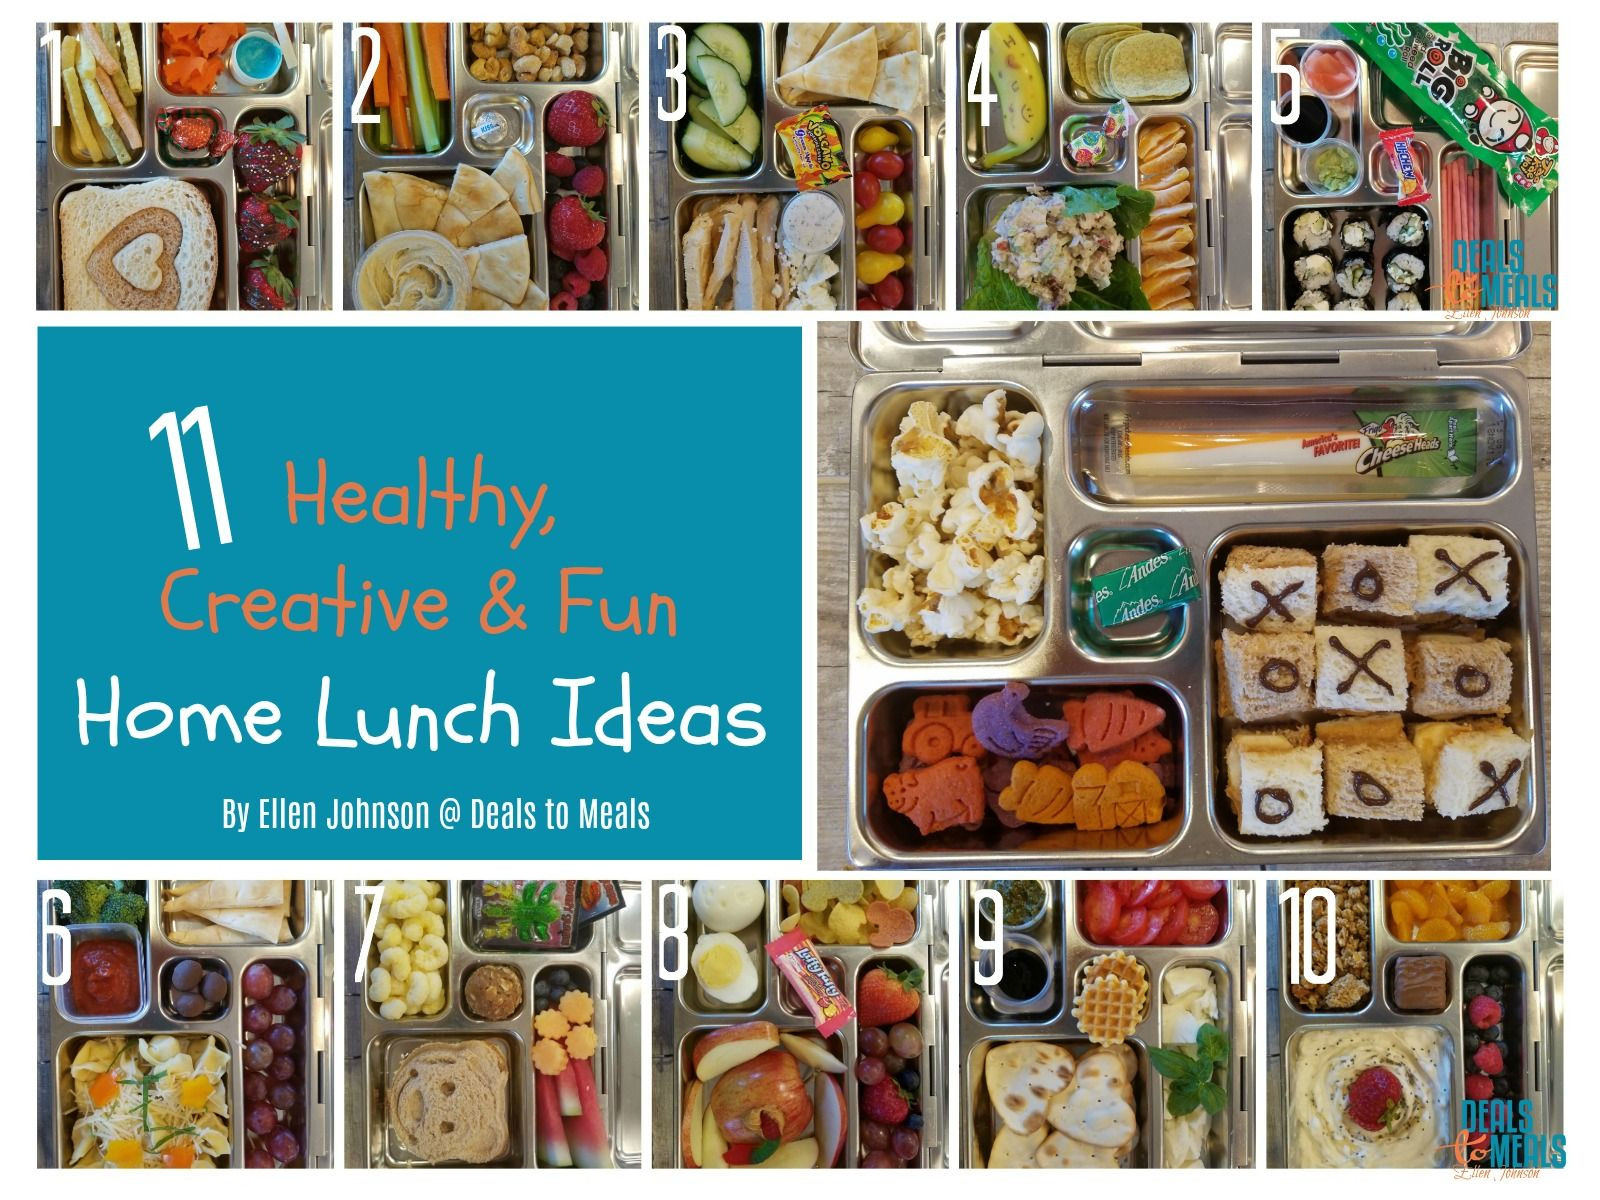 Dinner Ideas For Friends Coming Over
 11 Home Lunch Ideas Healthy Creative and Fun